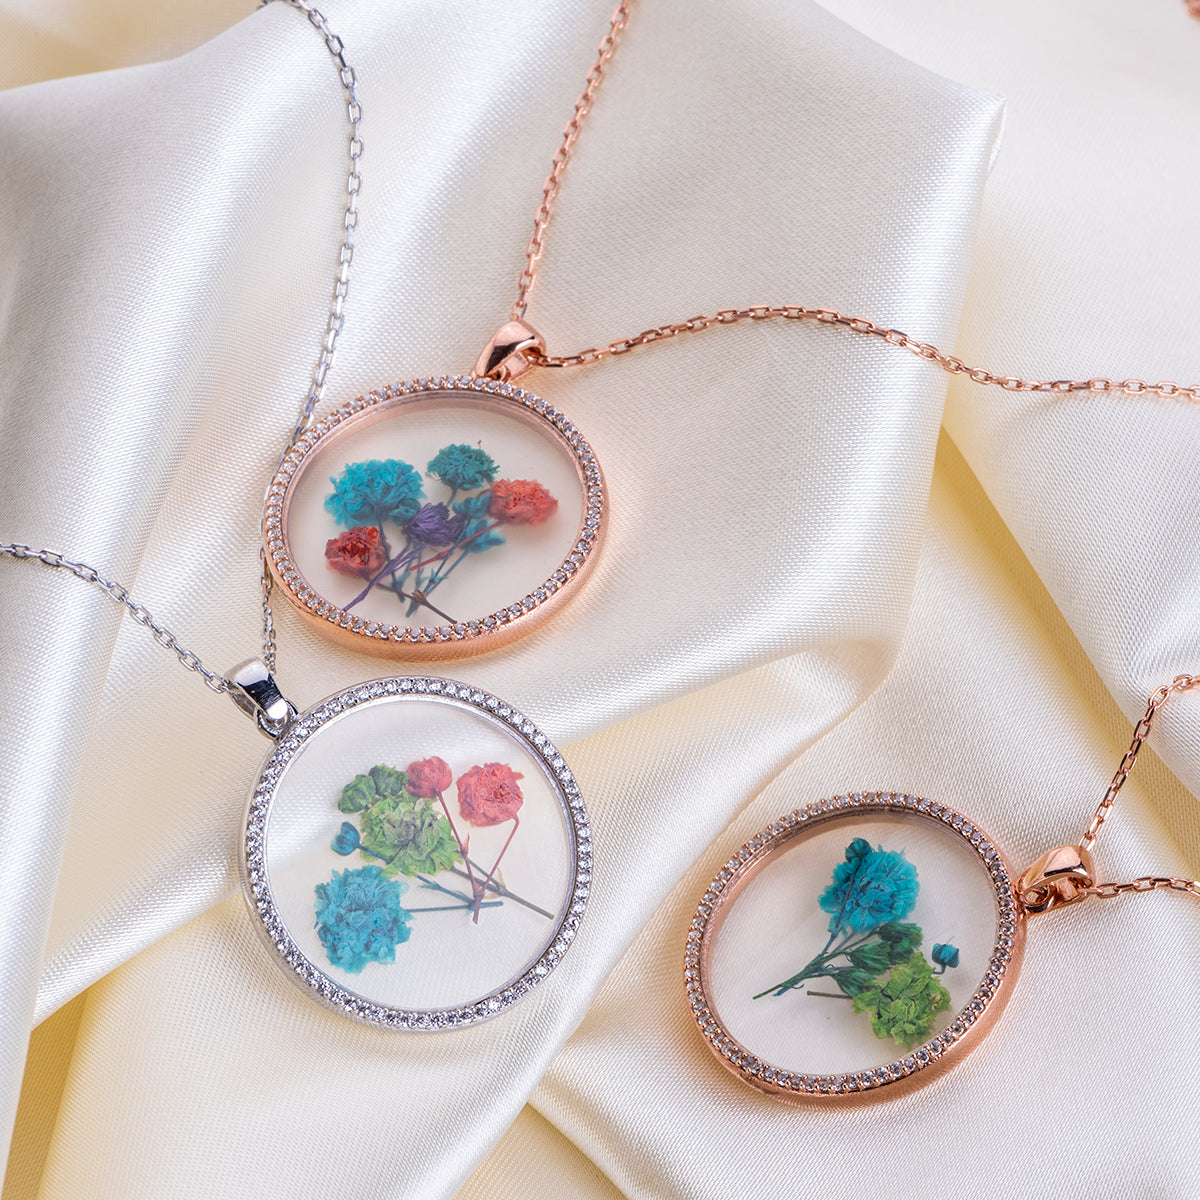 Silver necklaces with circle glass pendants with flowers  on a satin fabric, to show more realistic look.